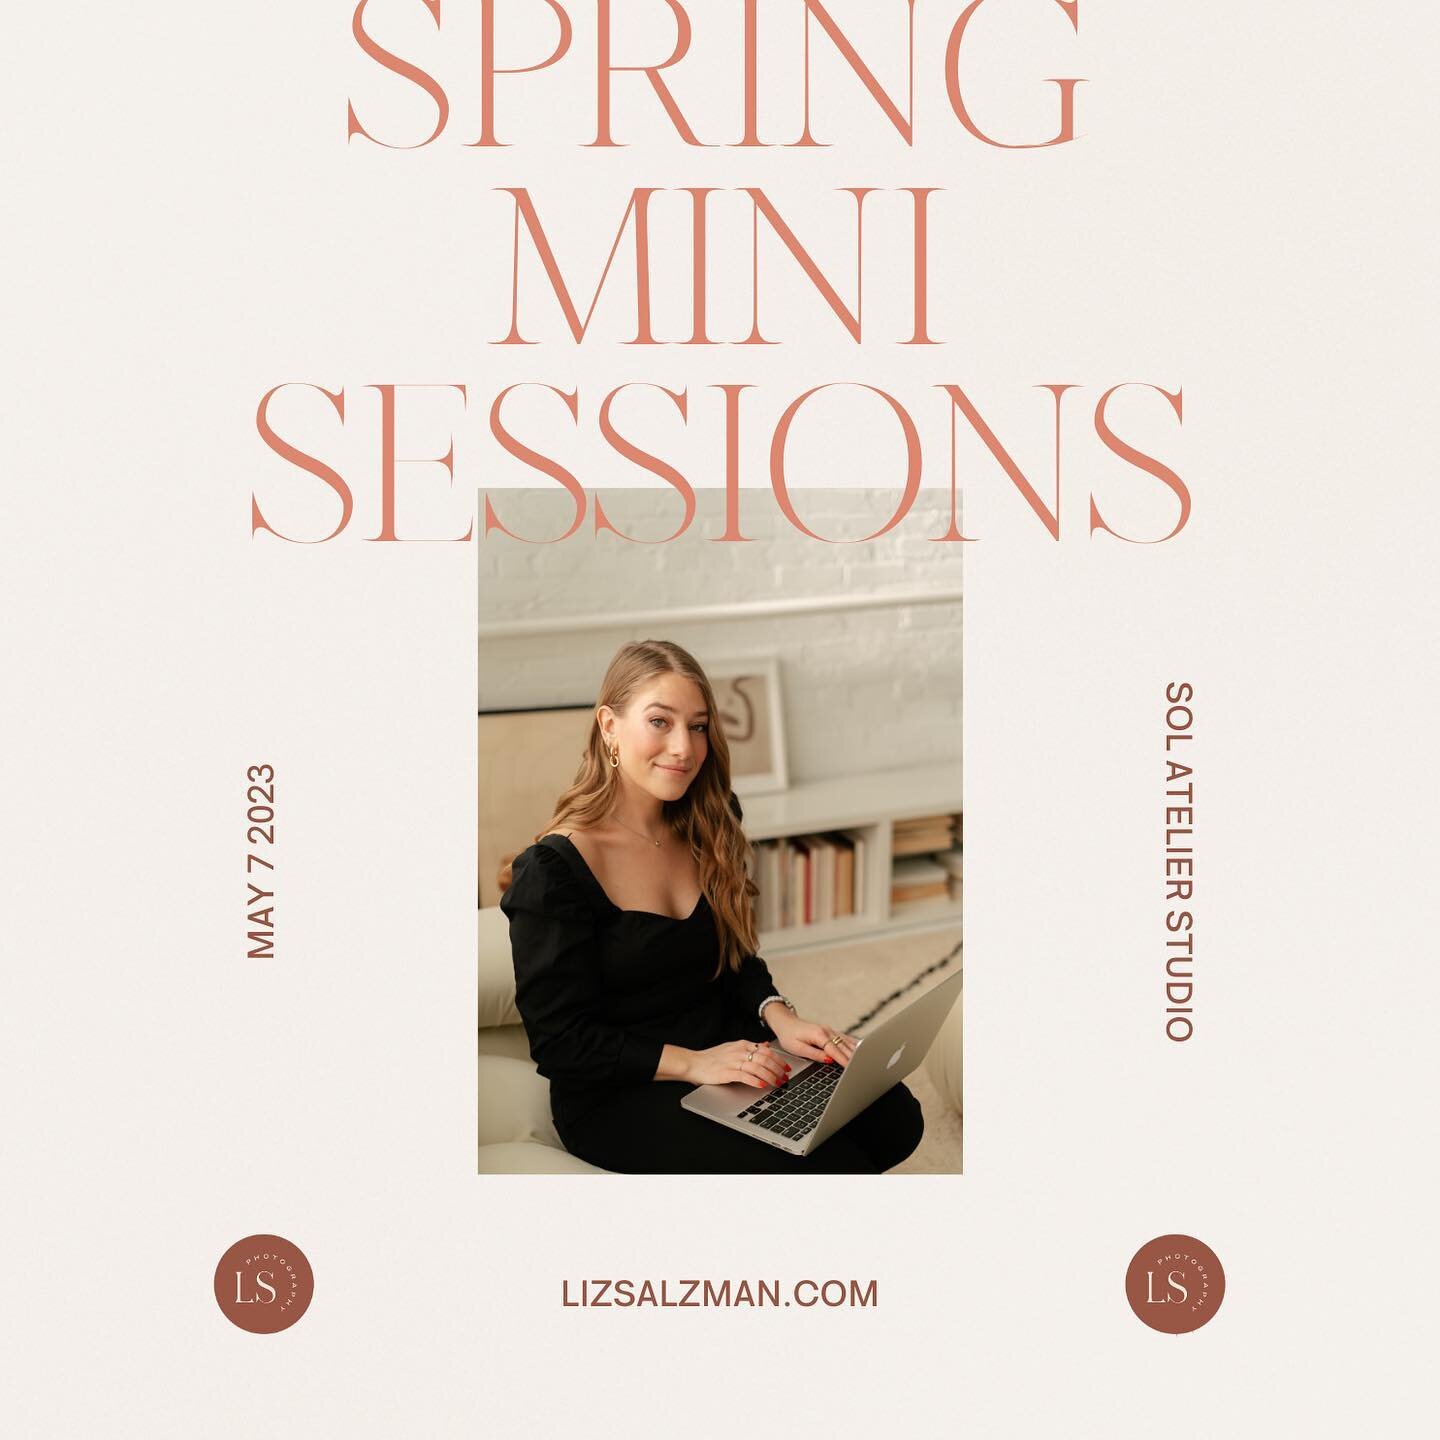 Spring mini sessions are here 💗 May 7th! At the gorgeous @sol.atelier.toronto 🤩 
Do you need some new headshots? A few great photos for social media or website? Dating app photos? Fresh content in between bigger shoots? Meet me on May 7th 😉 You kn